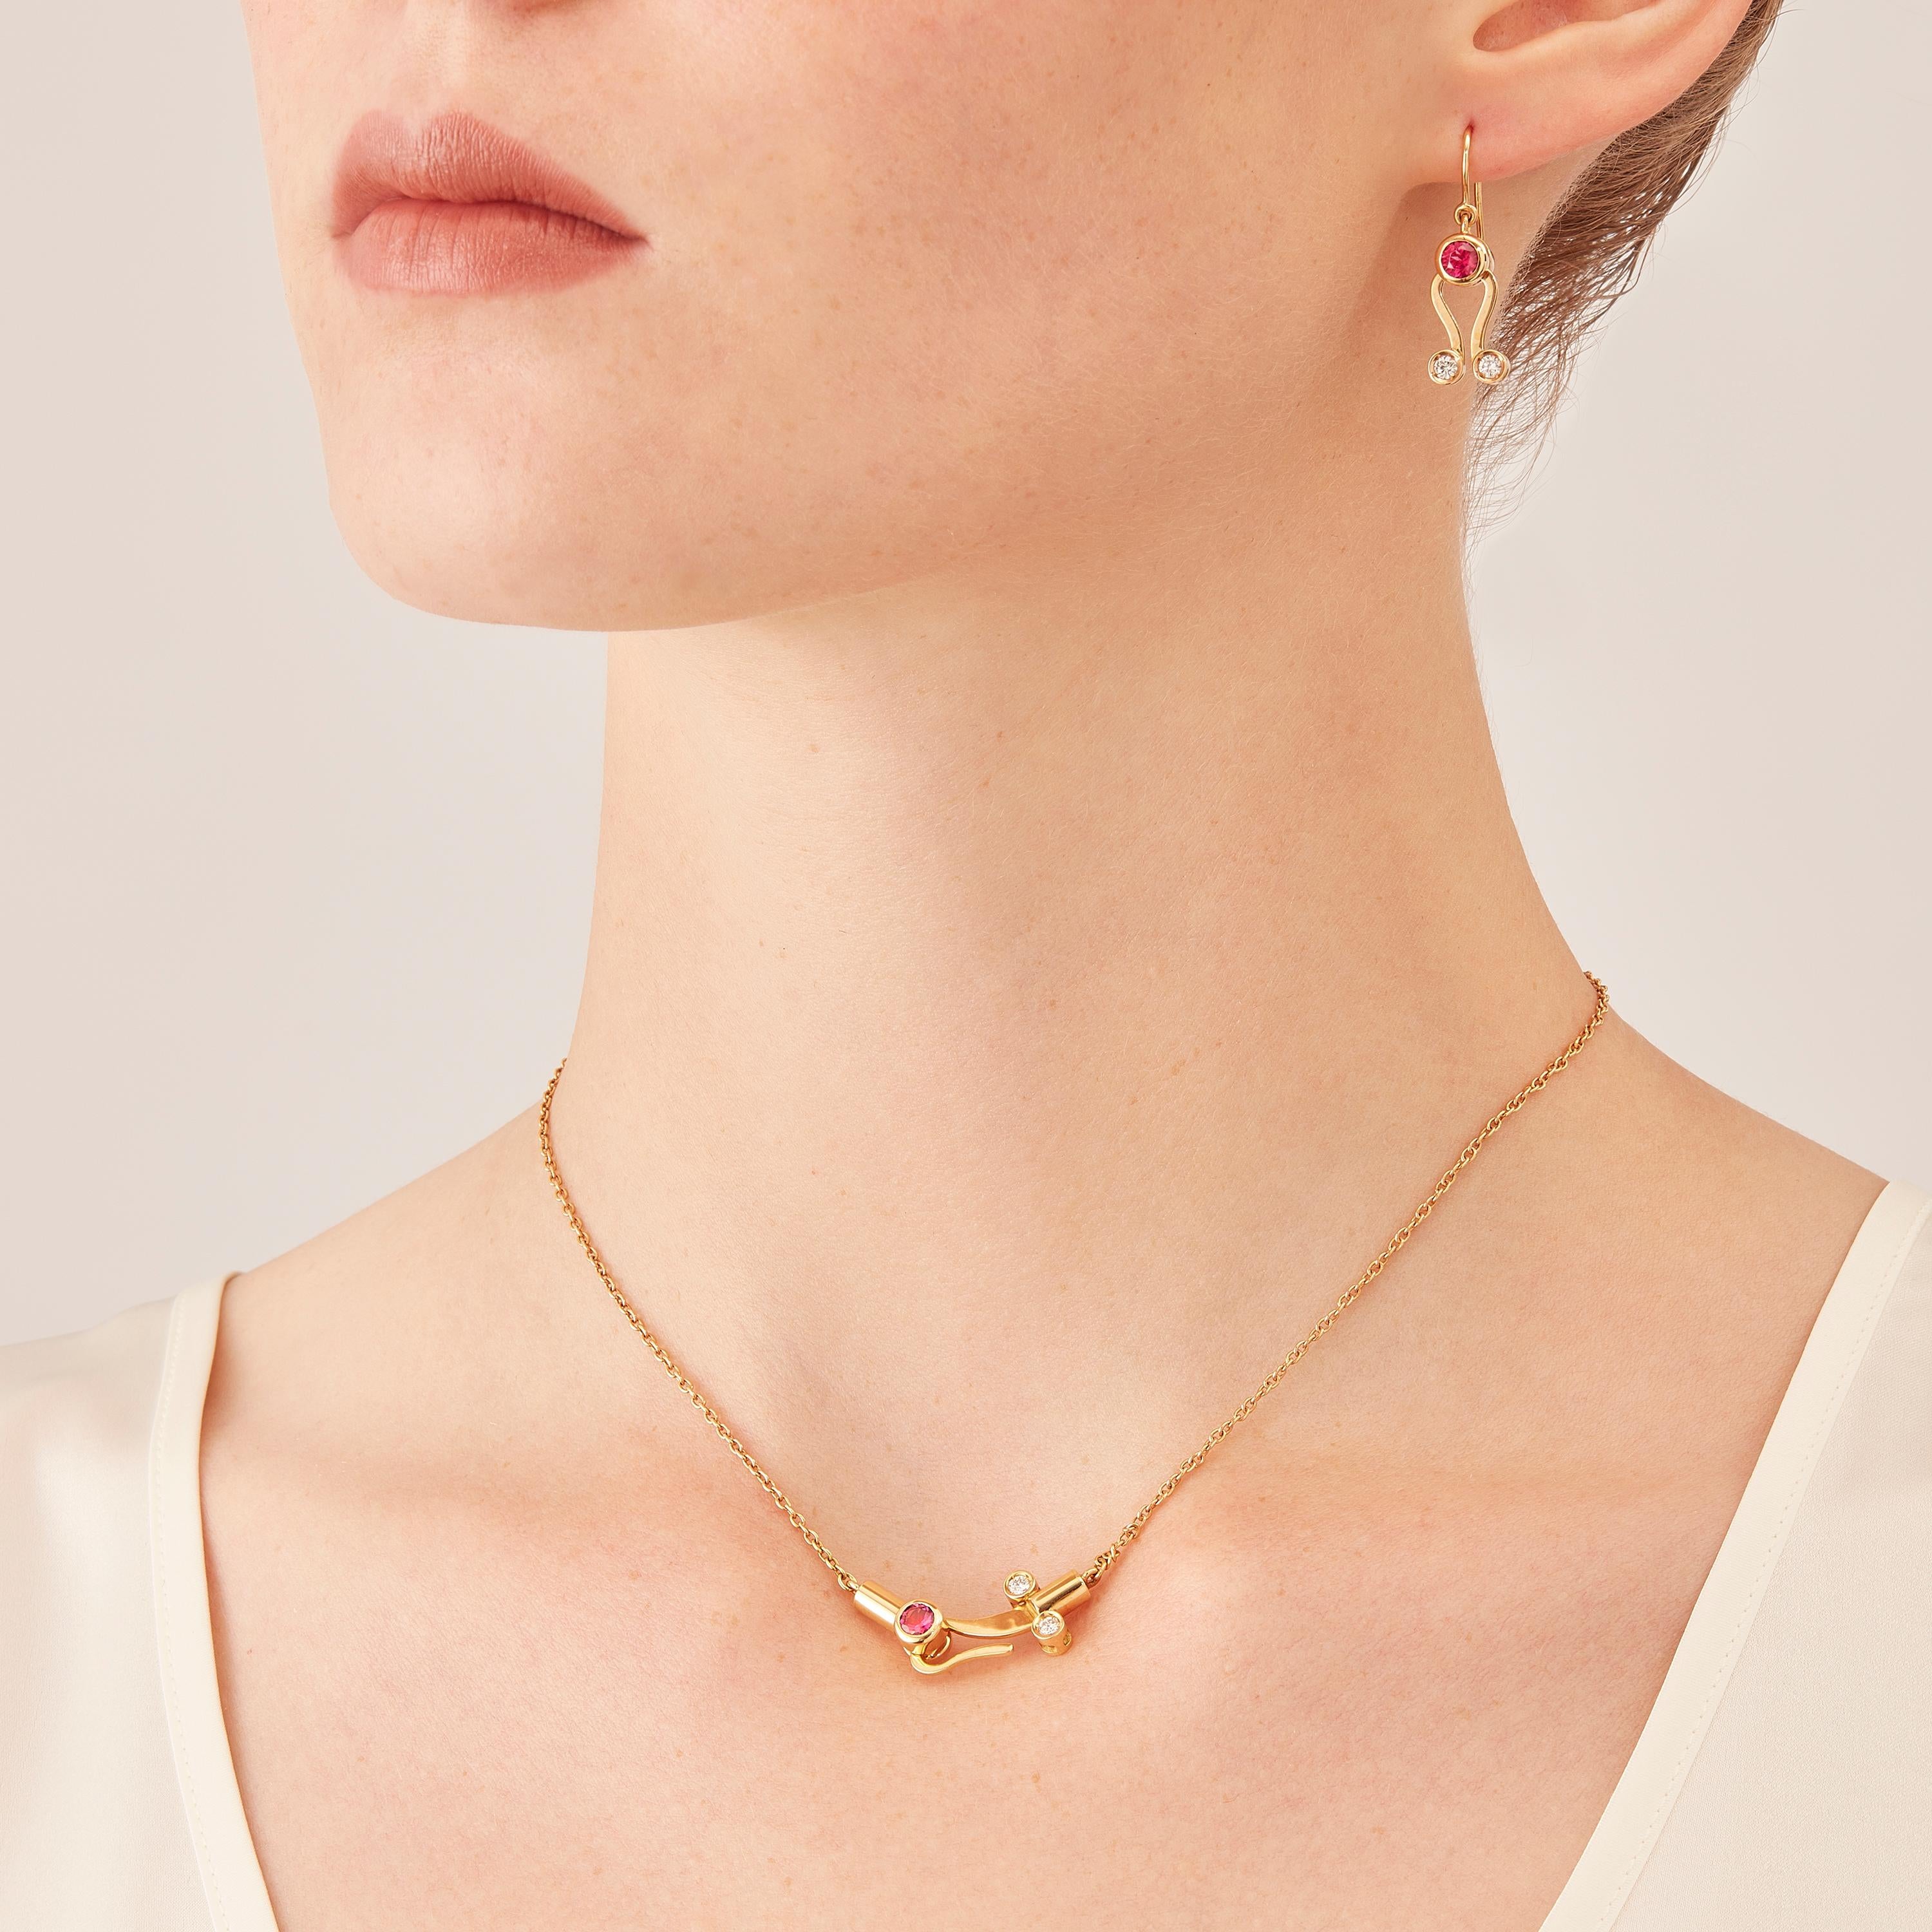 Made by hand in Nathalie Jean's Milan atelier, Microcosmos drop pendant necklace, in 18 karat rosé gold, a warm, sophisticated color close to yellow gold, is devised as a game, a construction or a sophisticated aerial mobile. Shapes attached to gold